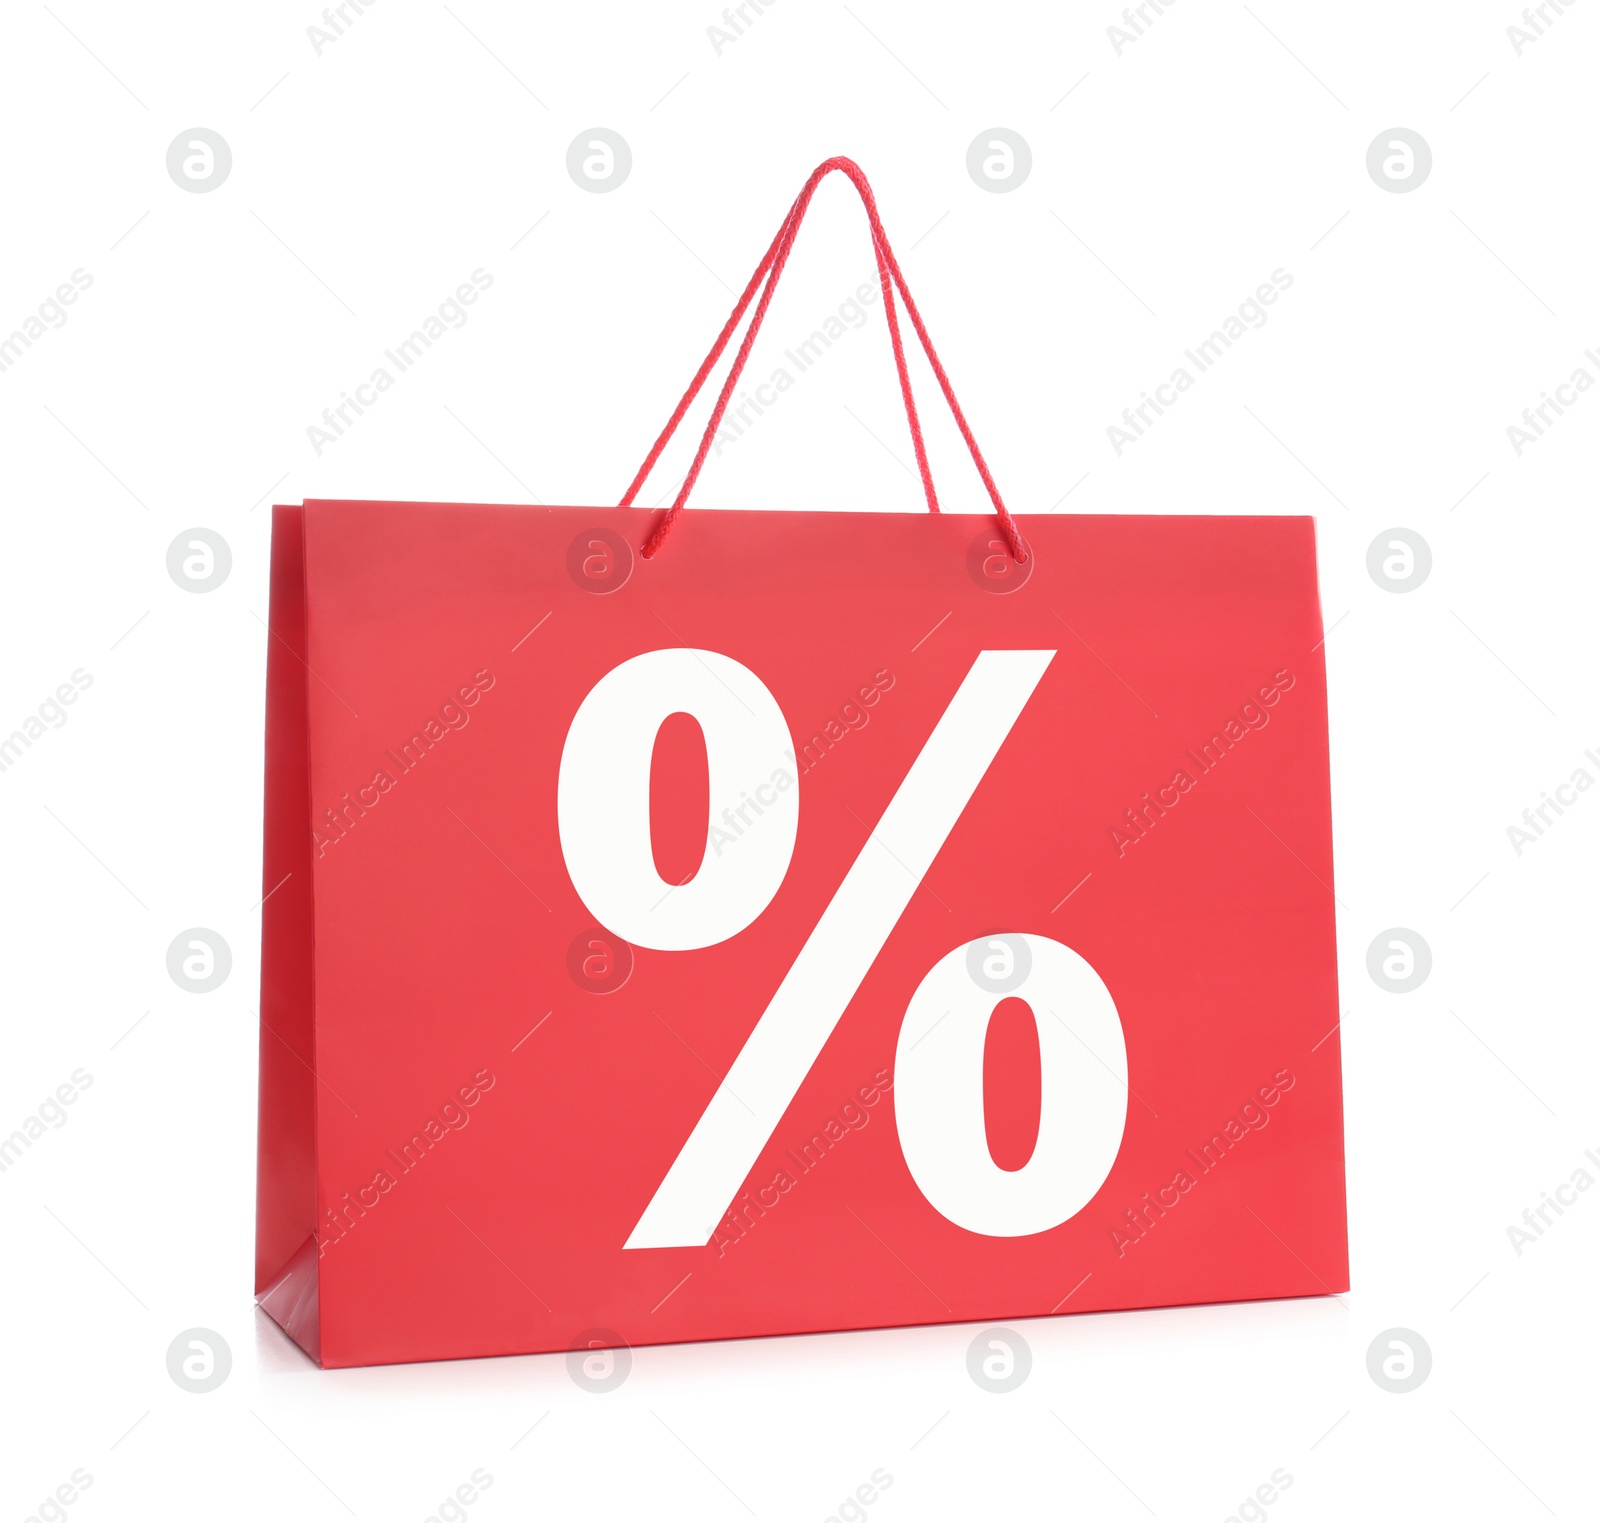 Image of Red paper shopping bag with percent sign on white background. Discount concept